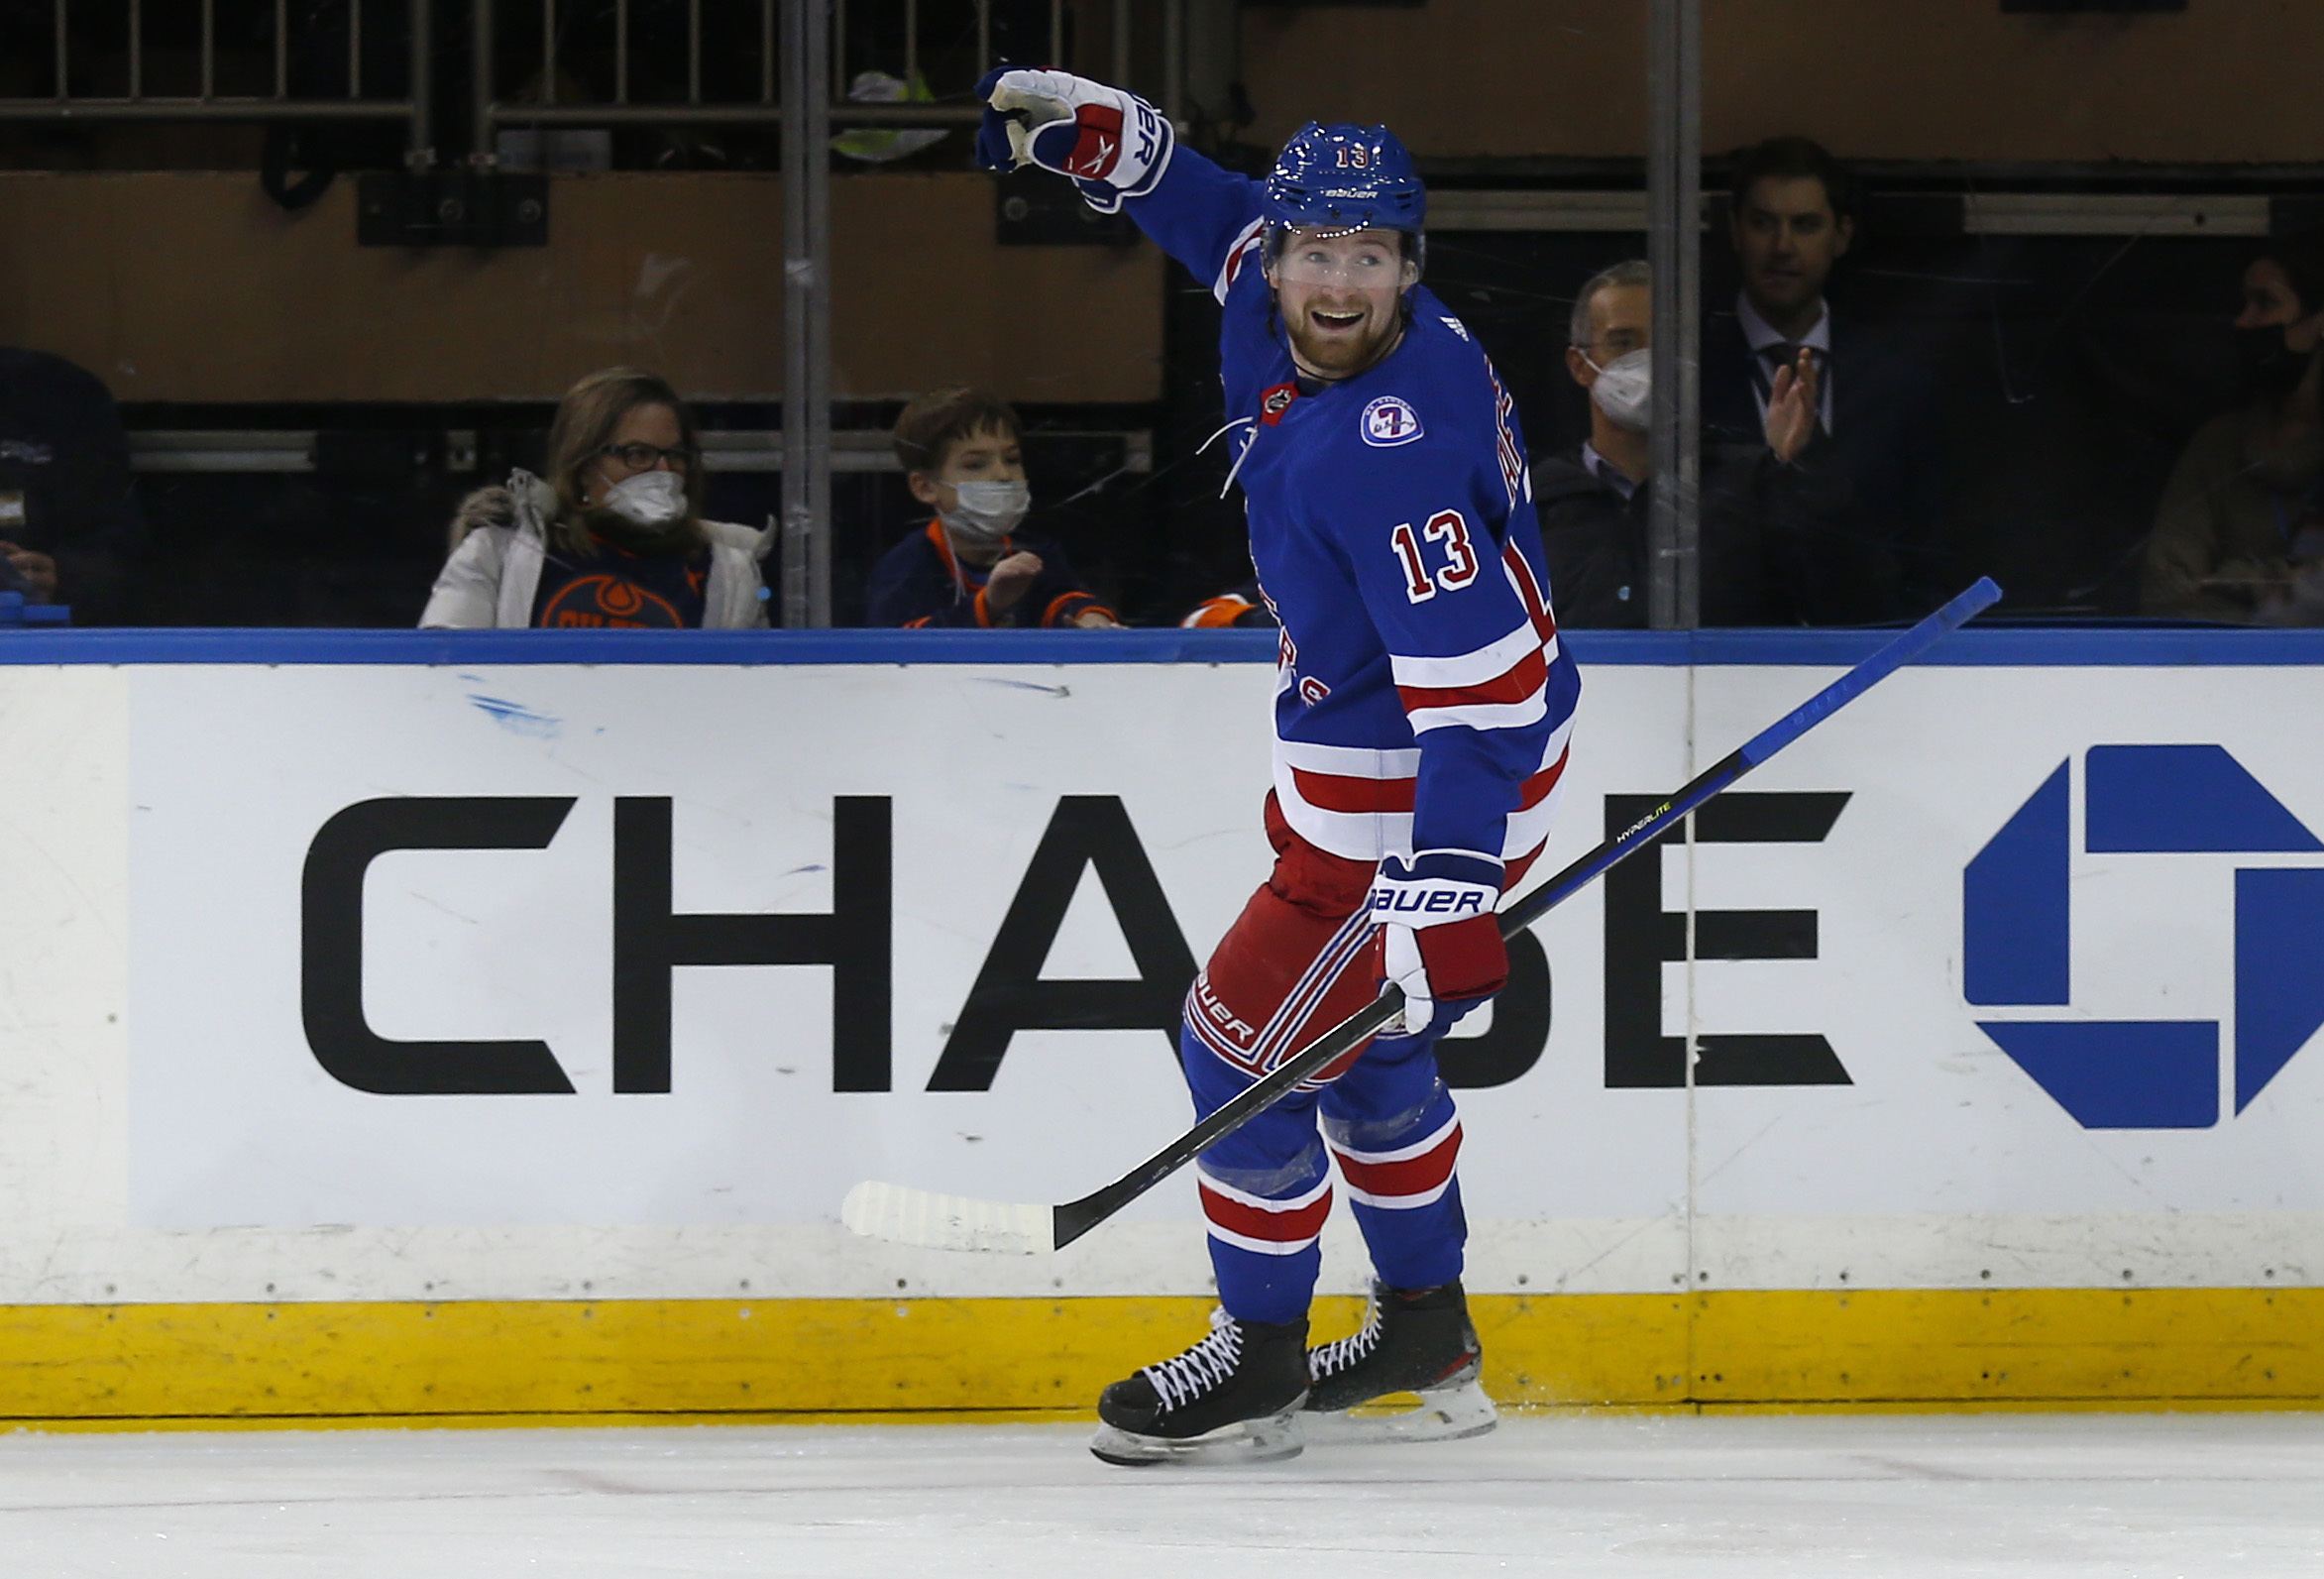 Rangers beat Bruins 4-0 in Panarin's first game back